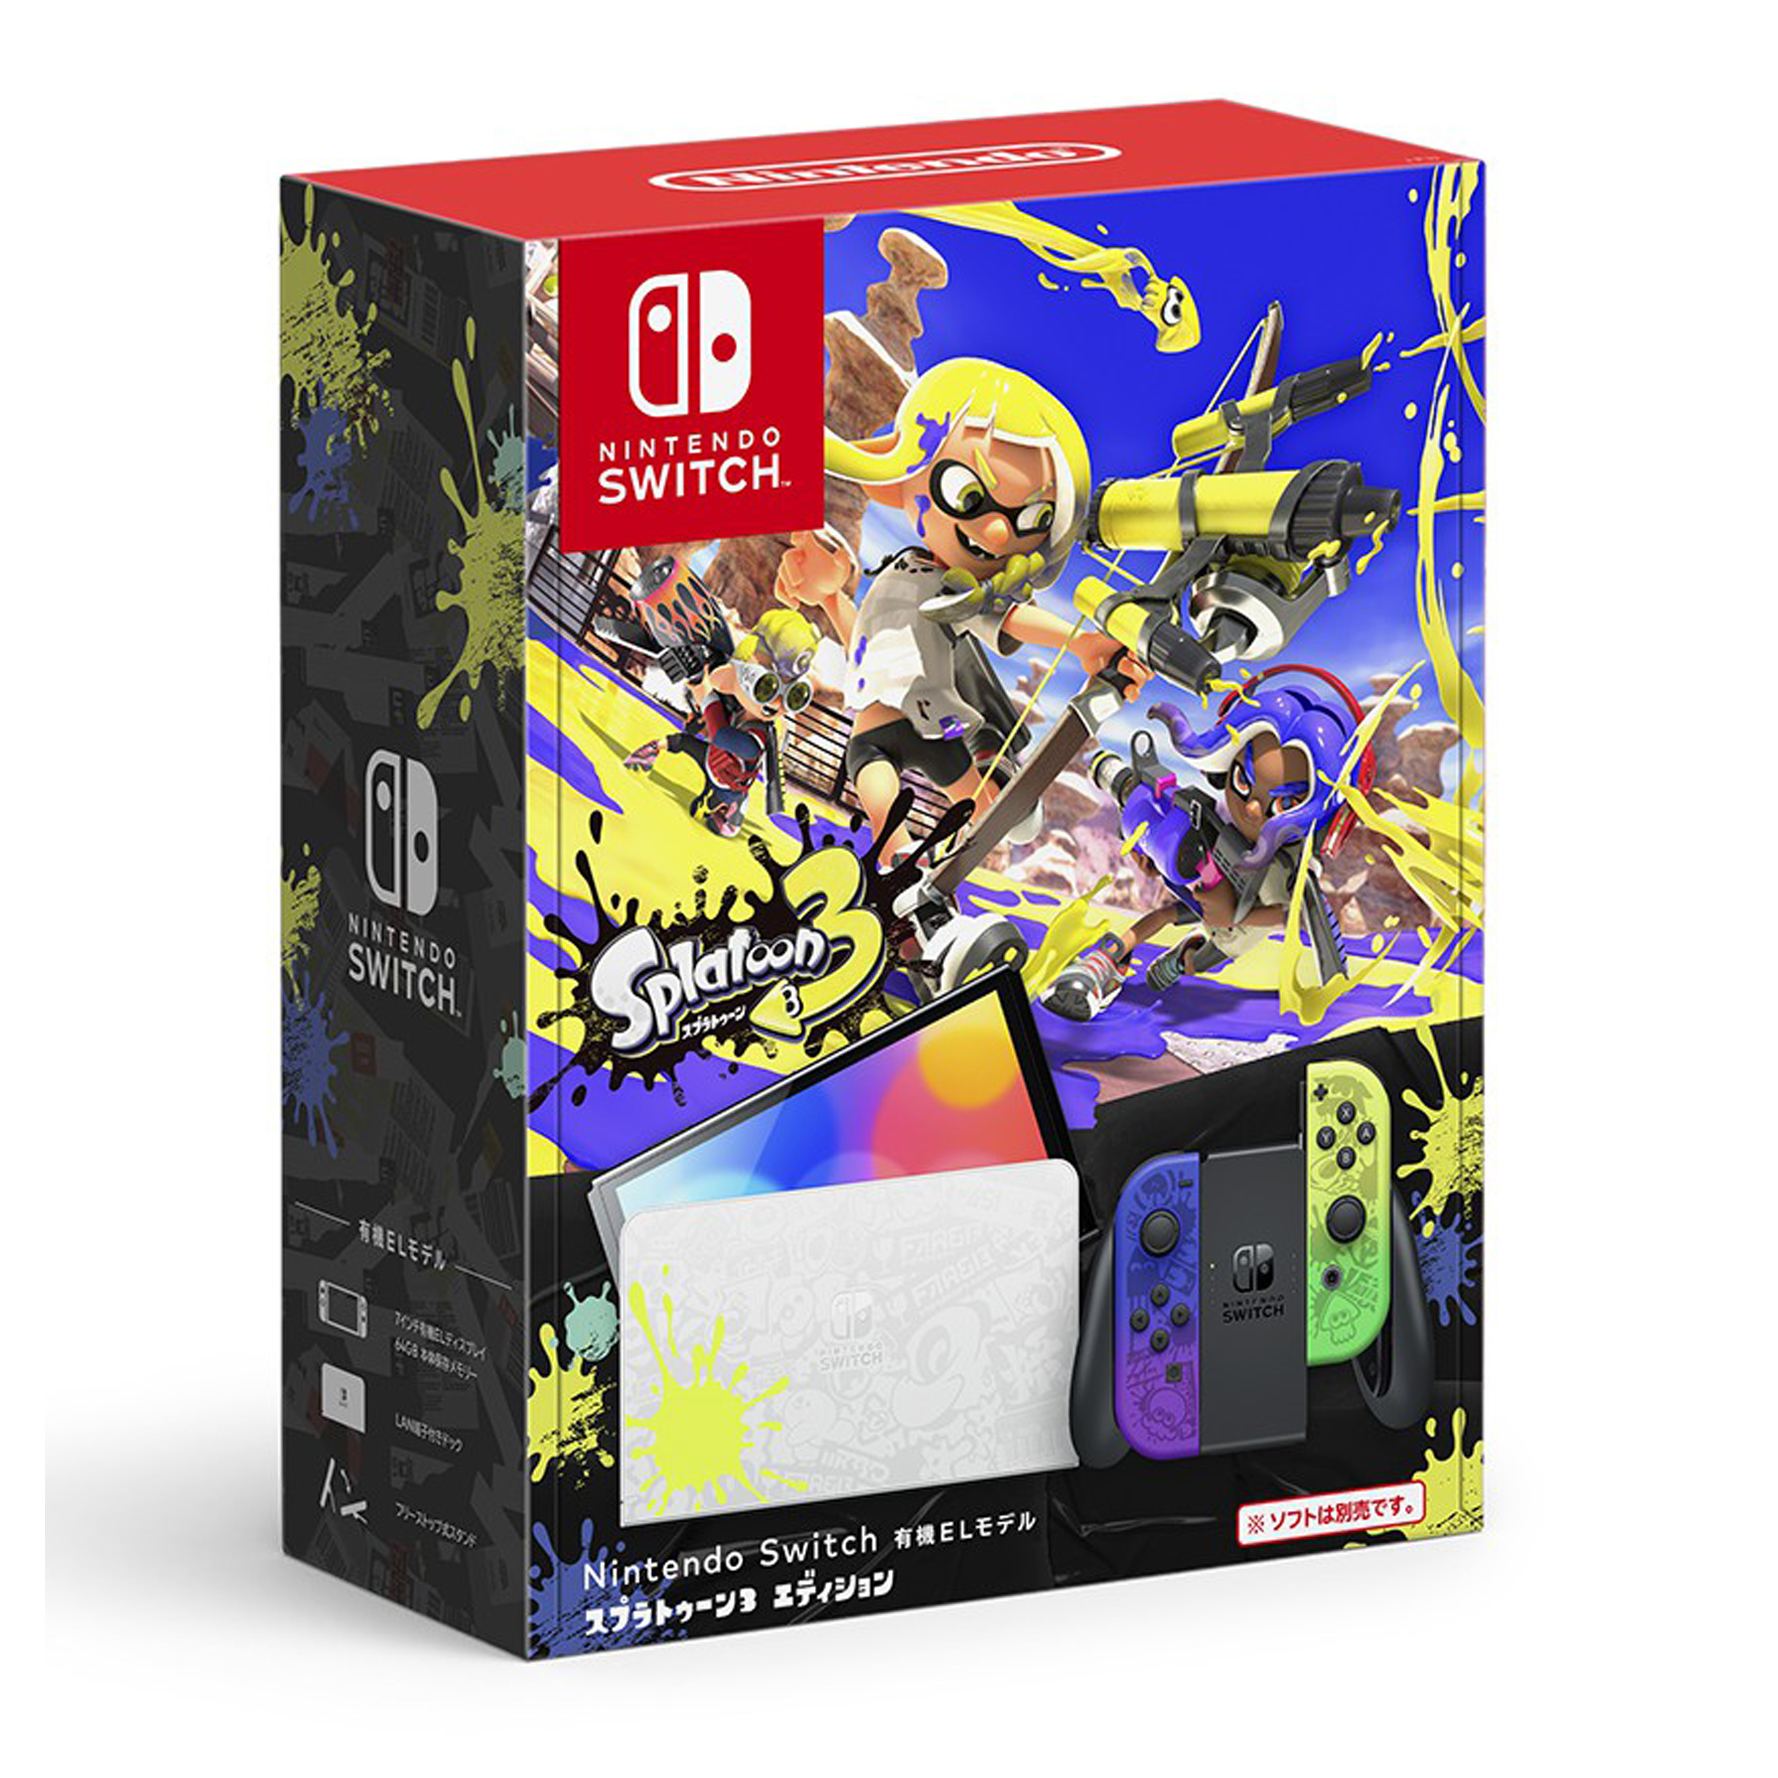 Nintendo Switch OLED Model [Pokemon Scarlet & Violet Limited Edition] -  Bitcoin & Lightning accepted